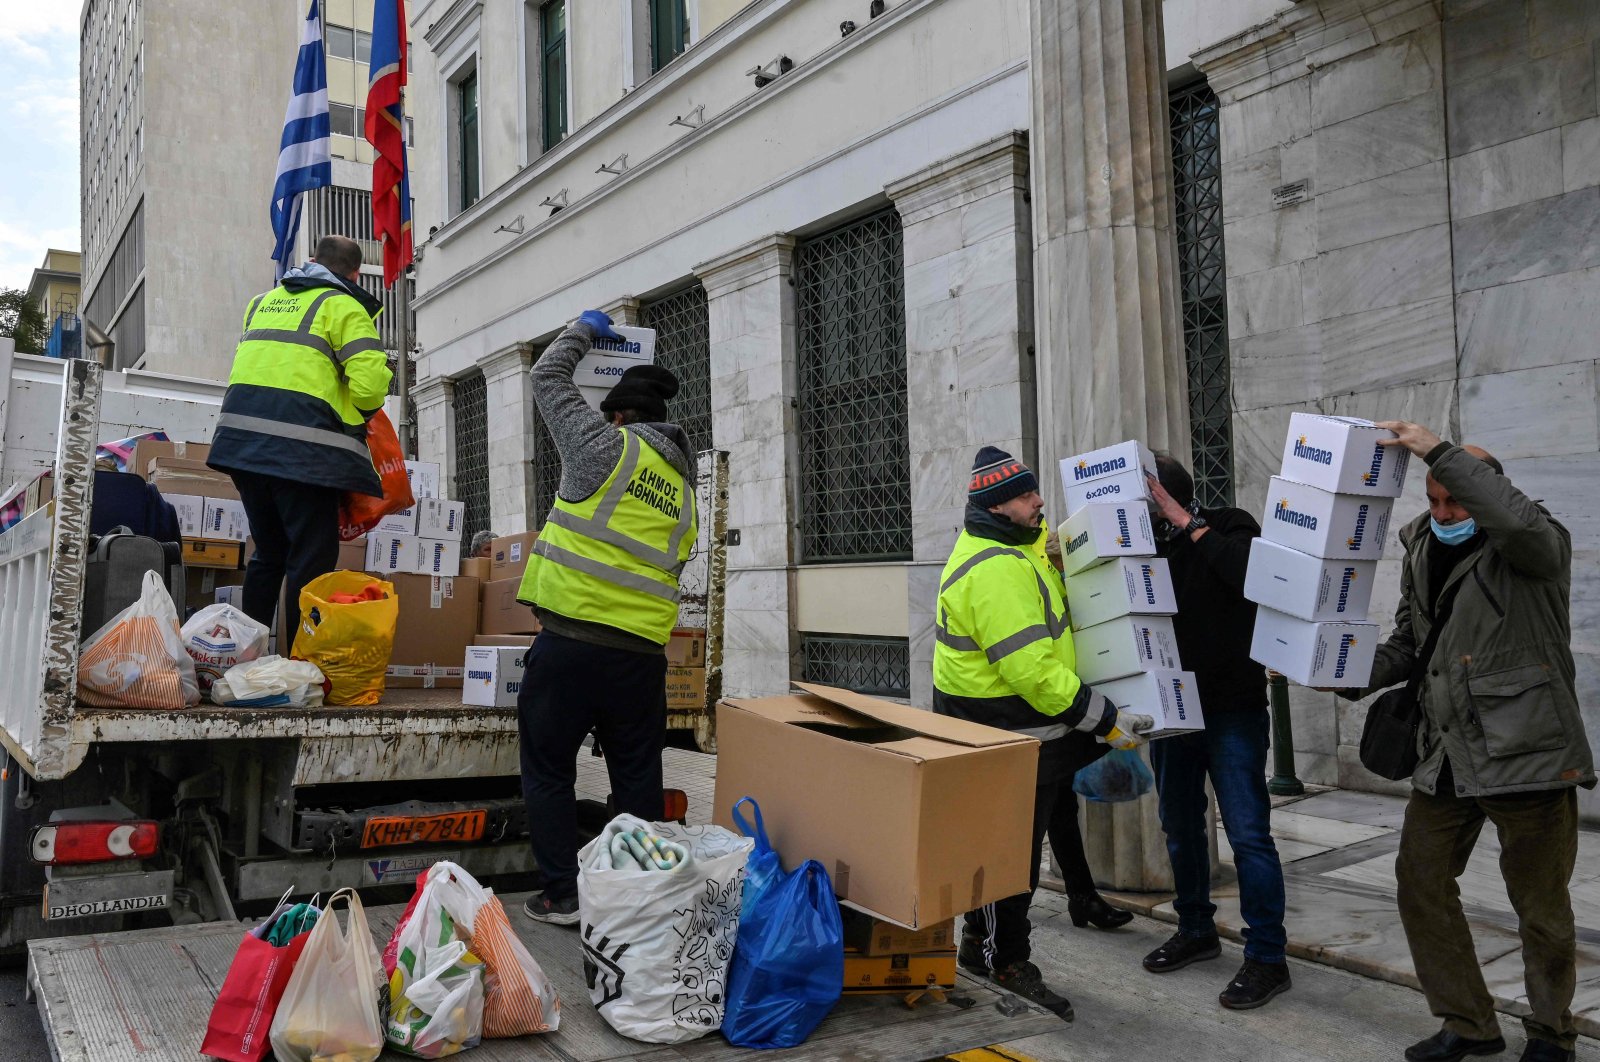 Municipal workers load a truck with humanitarian aid outside of the municipality of Athens, Greece, Feb. 10, 2023. (AFP Photo)